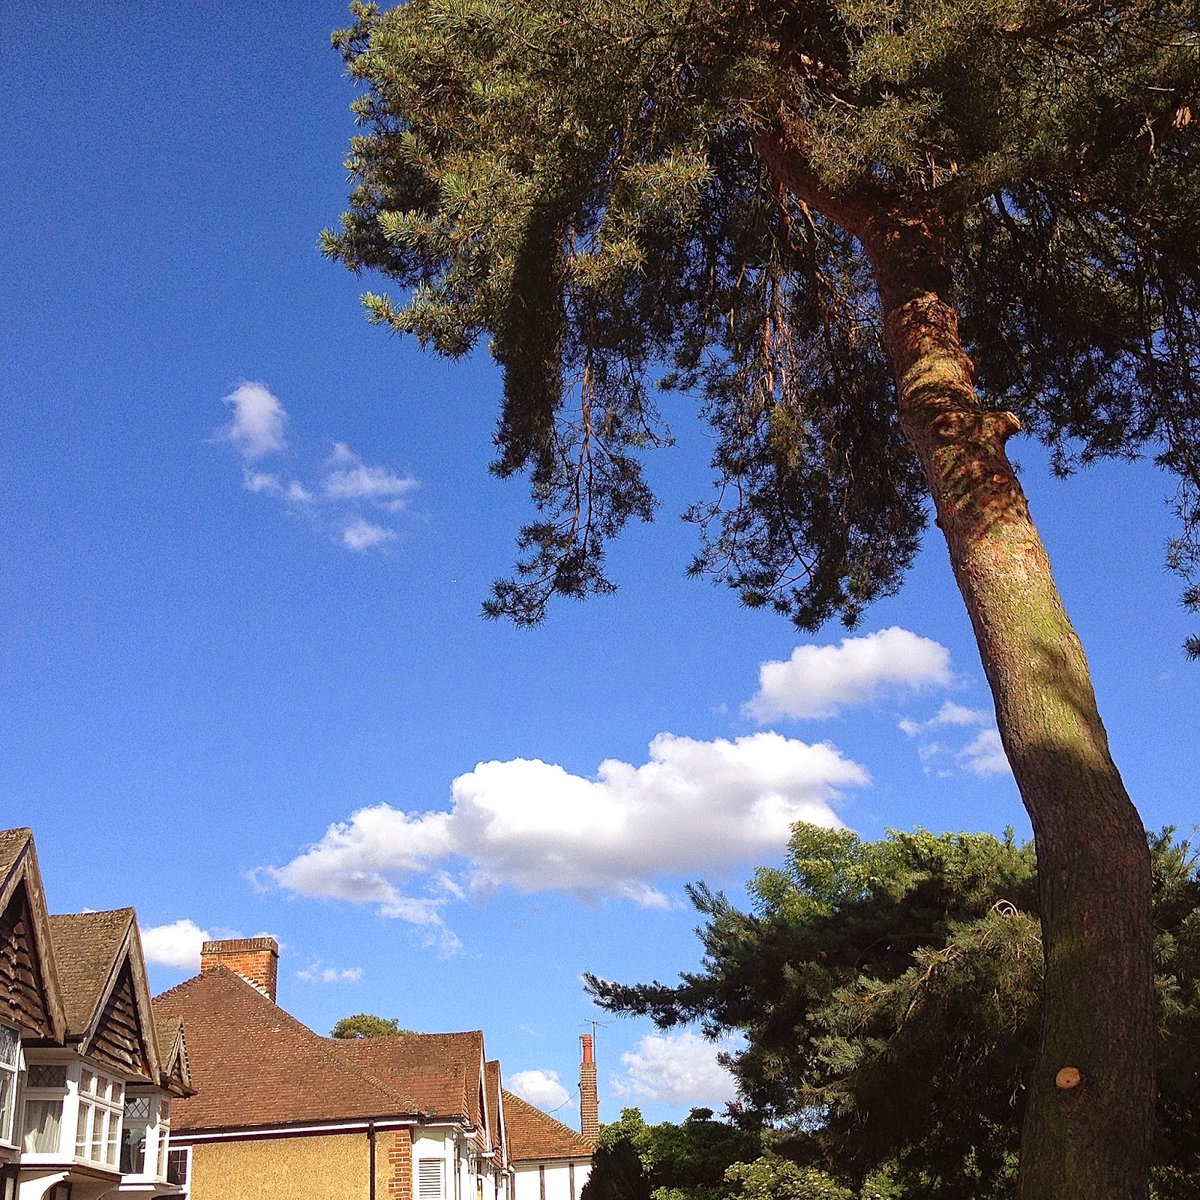 Finally, it’s the commonest pine you’ll see in suburbia and in parks and cemeteries in town.